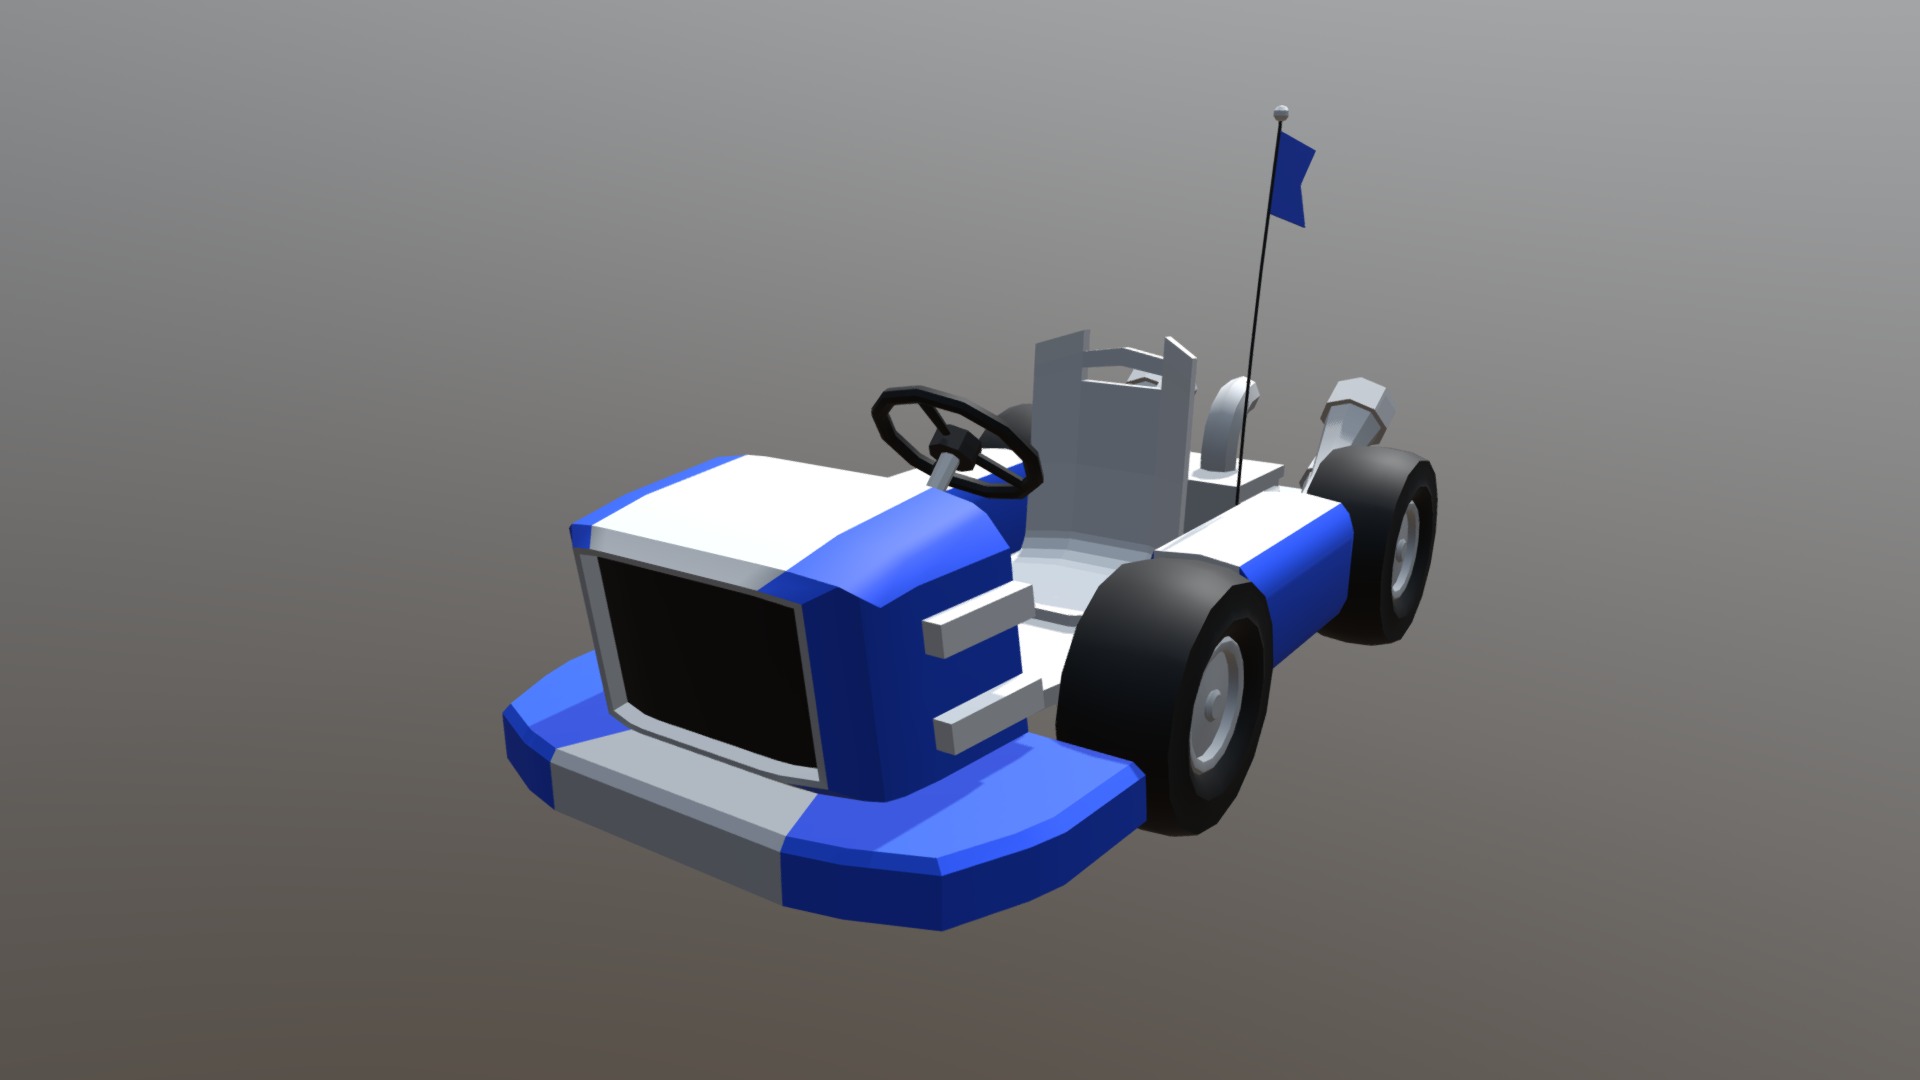 3D model Off Road Mini Kart 1 – Low Poly - This is a 3D model of the Off Road Mini Kart 1 - Low Poly. The 3D model is about a blue and white toy car.